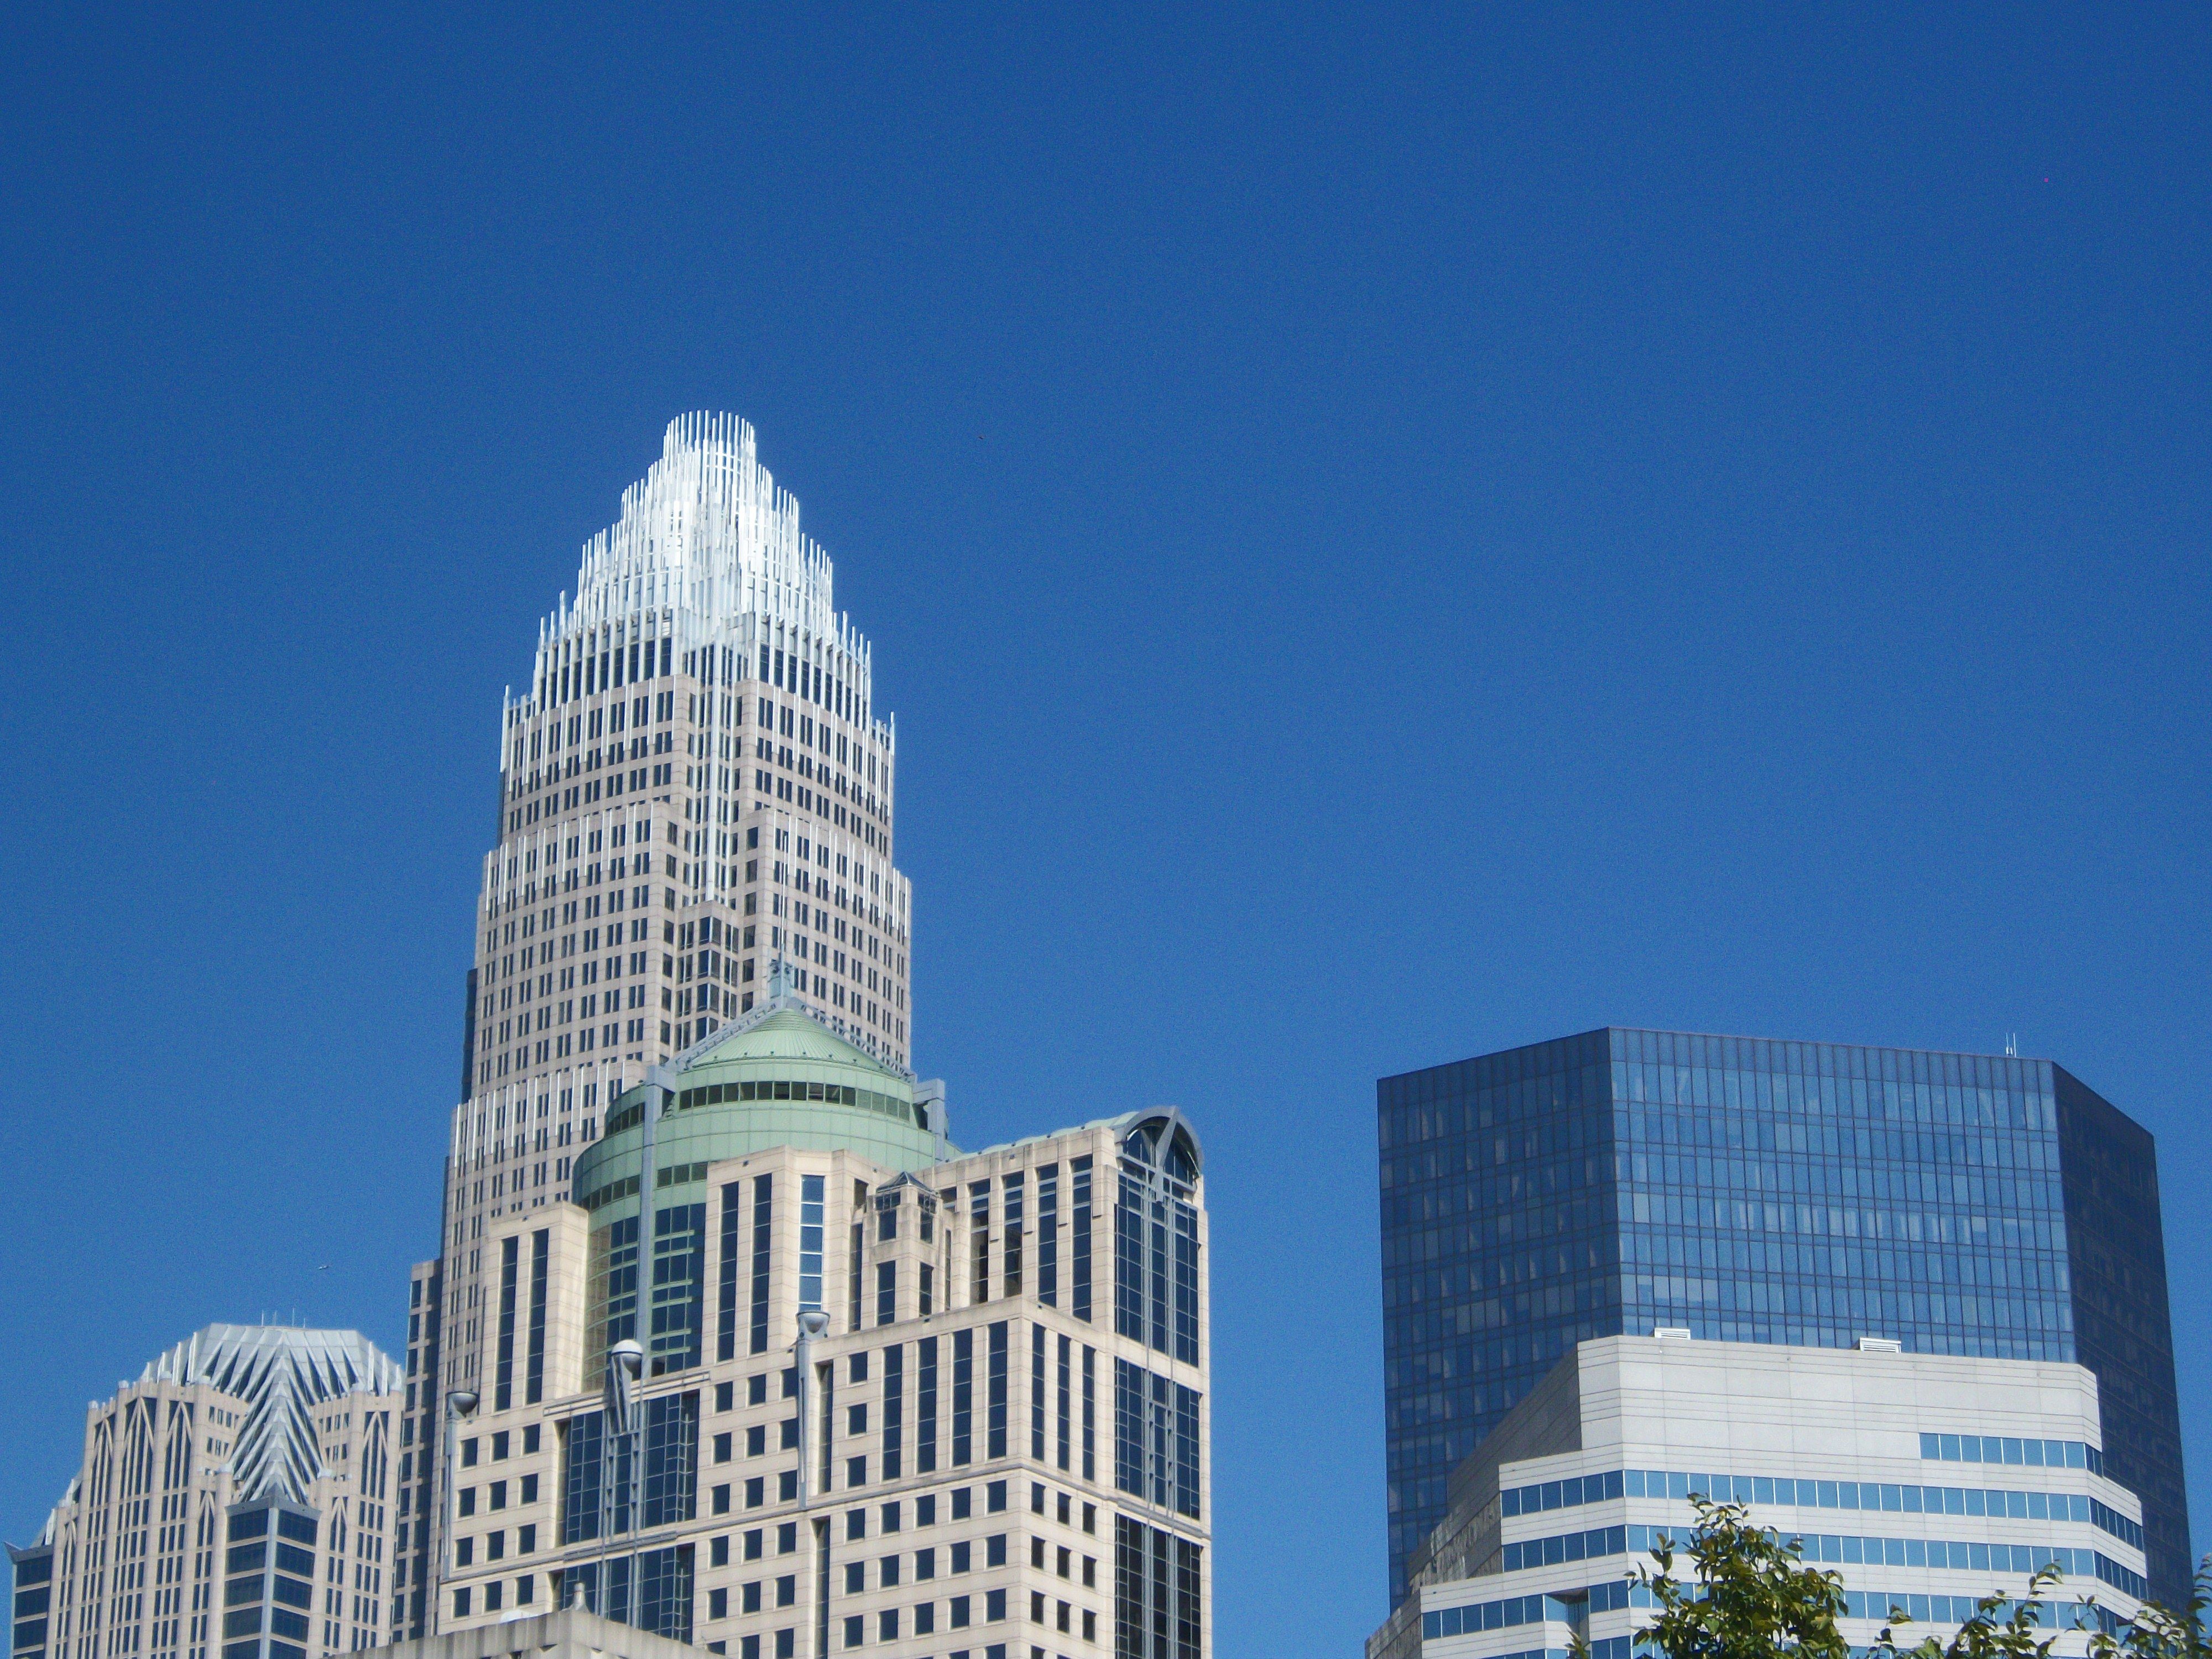 Downtown Charlotte, NC. | Cityscapes | Pinterest | Downtown ...